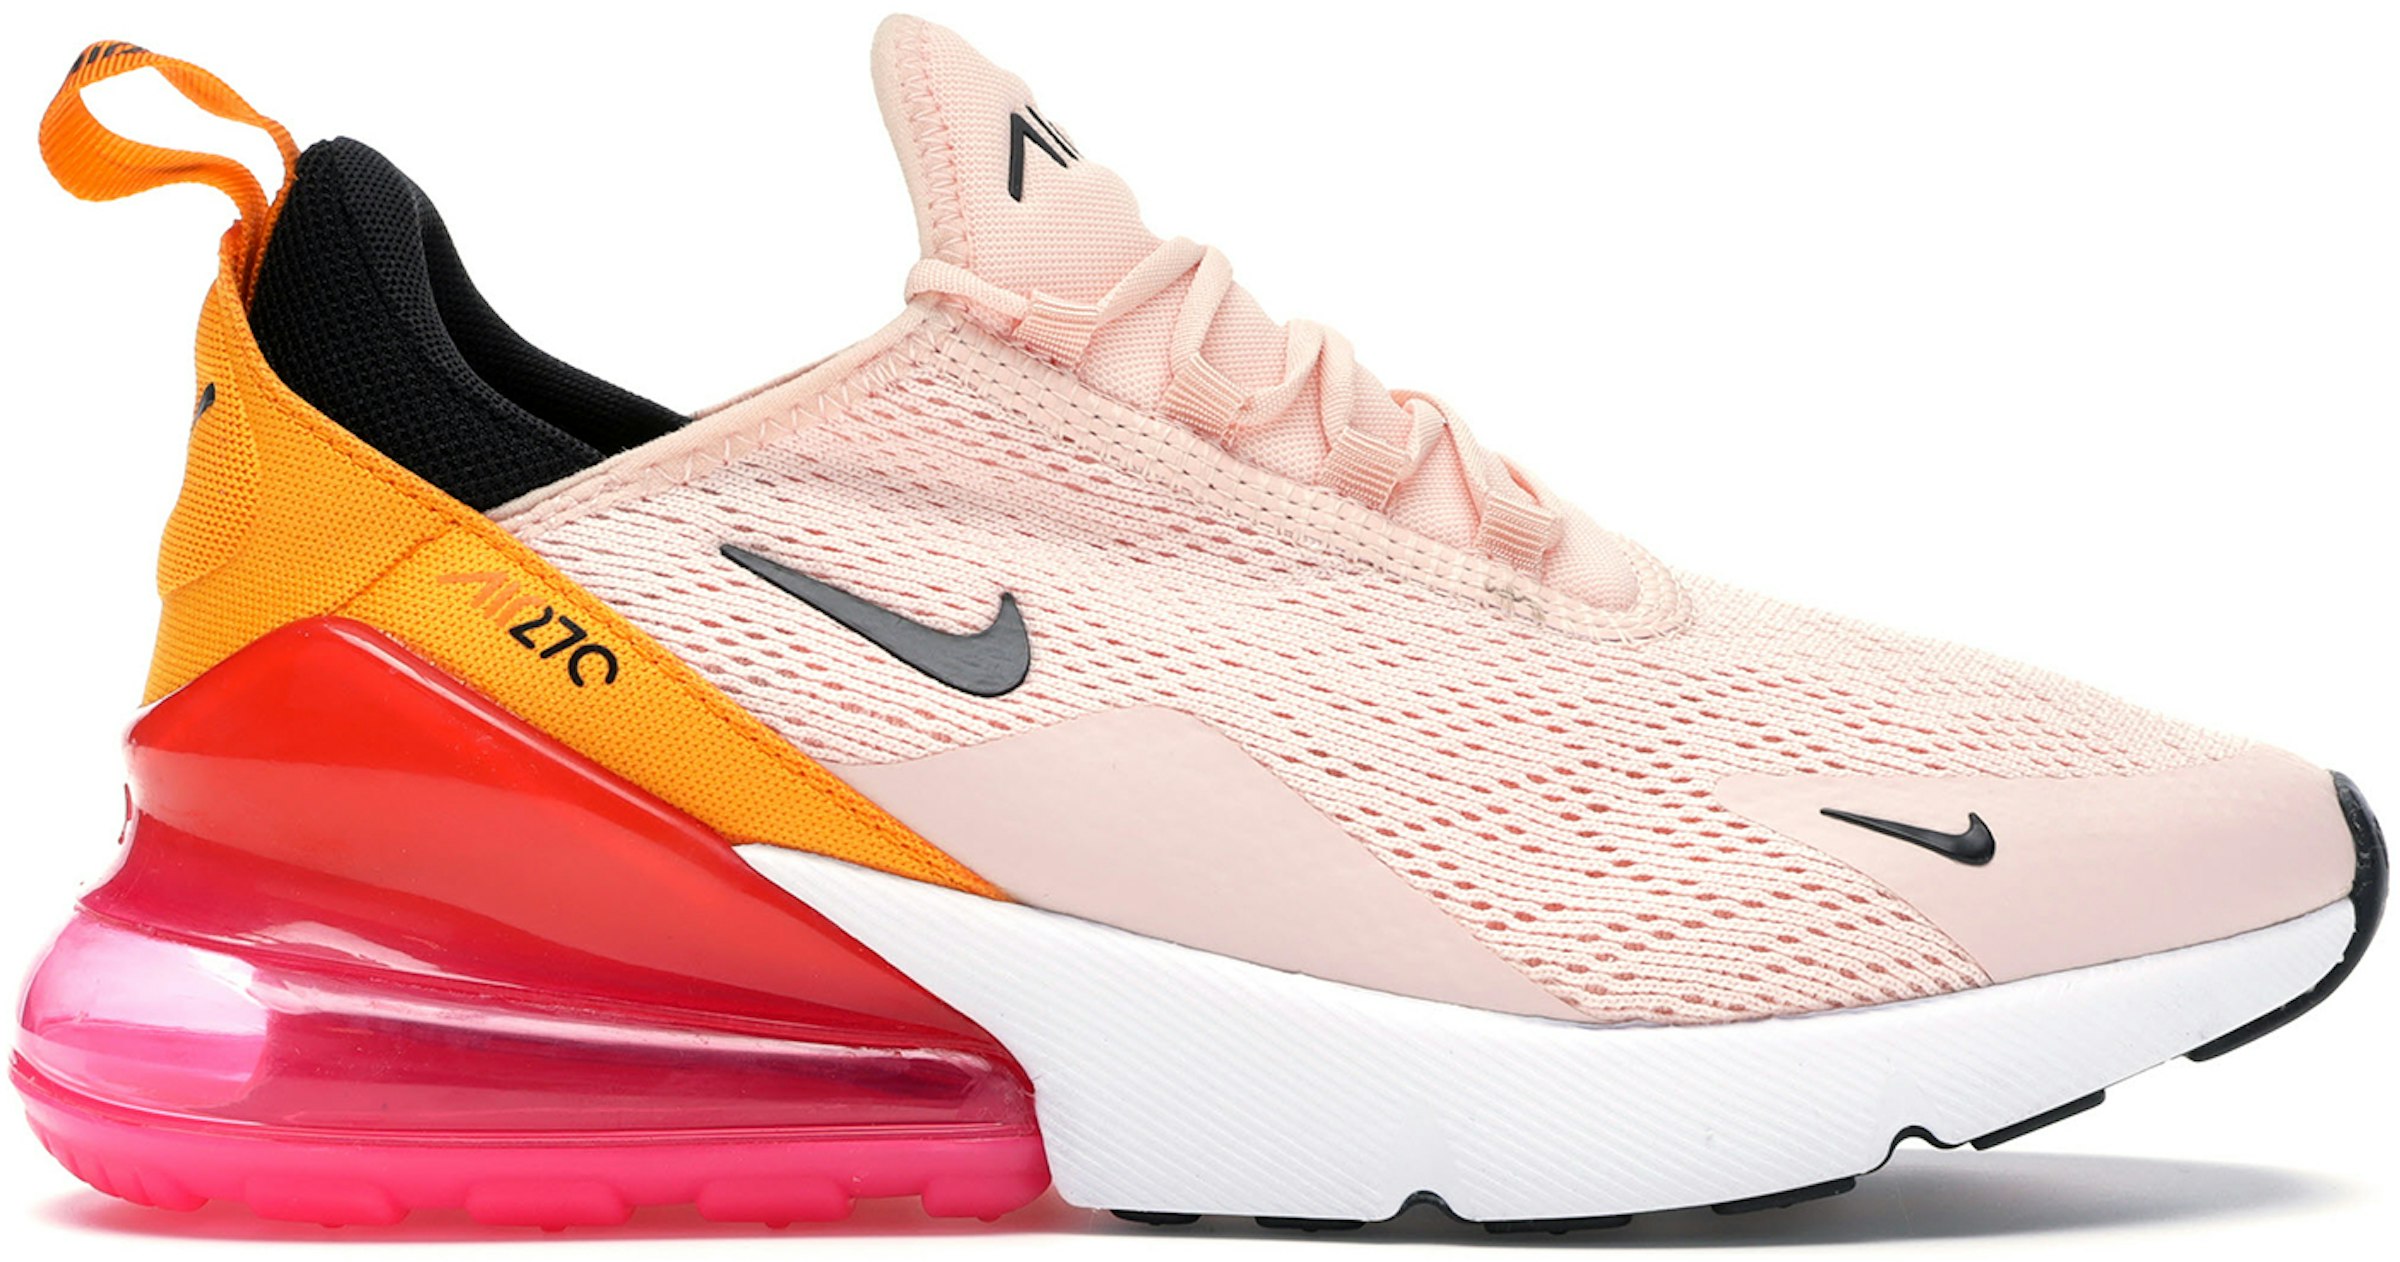 Nike Air 270 Washed Coral (Women's) - AH6789-603 US